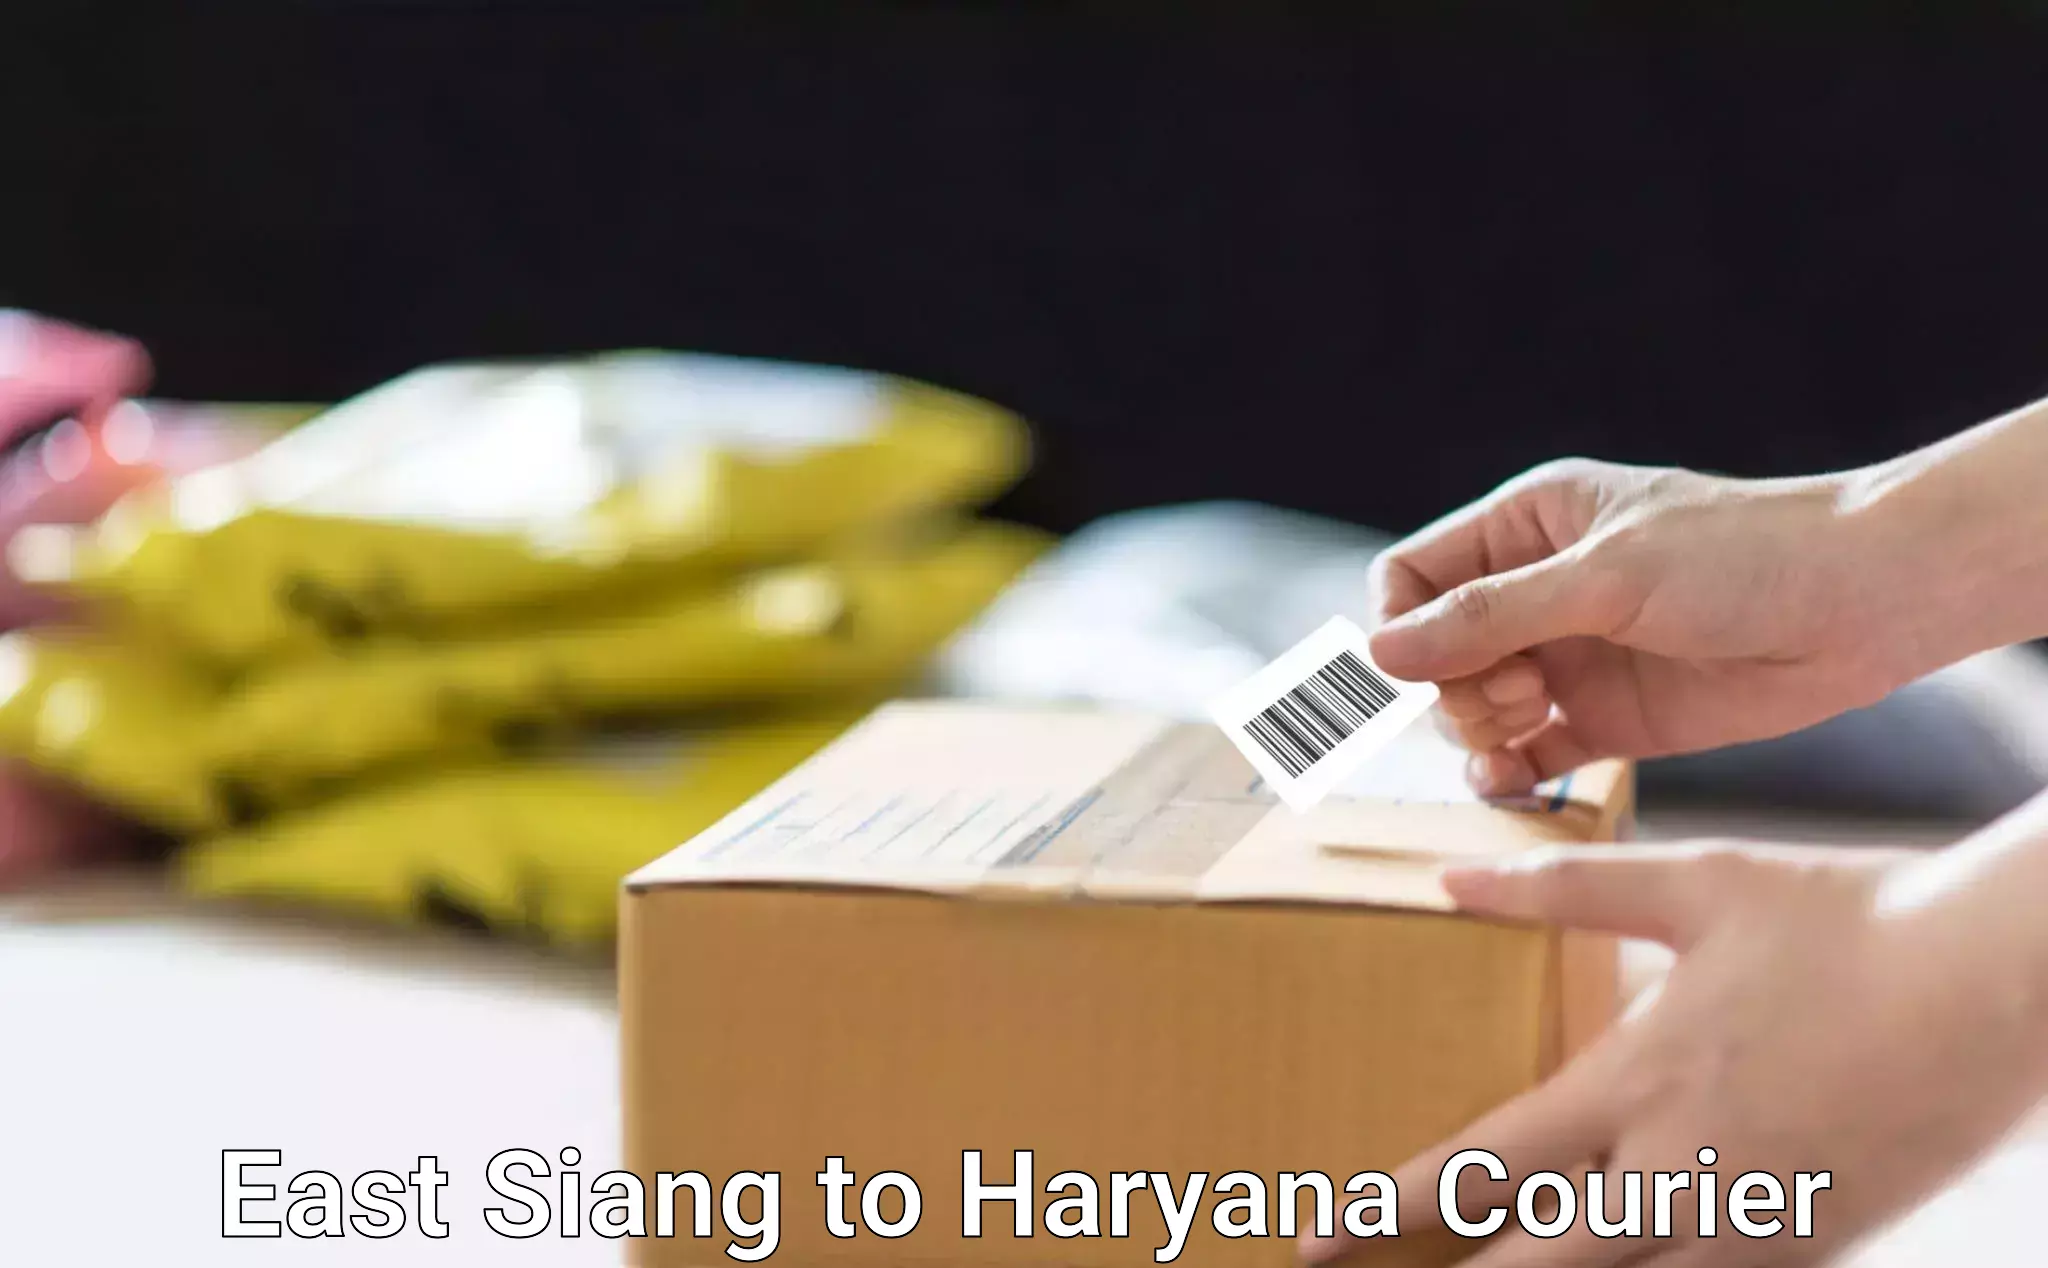 Bulk courier orders East Siang to Haryana